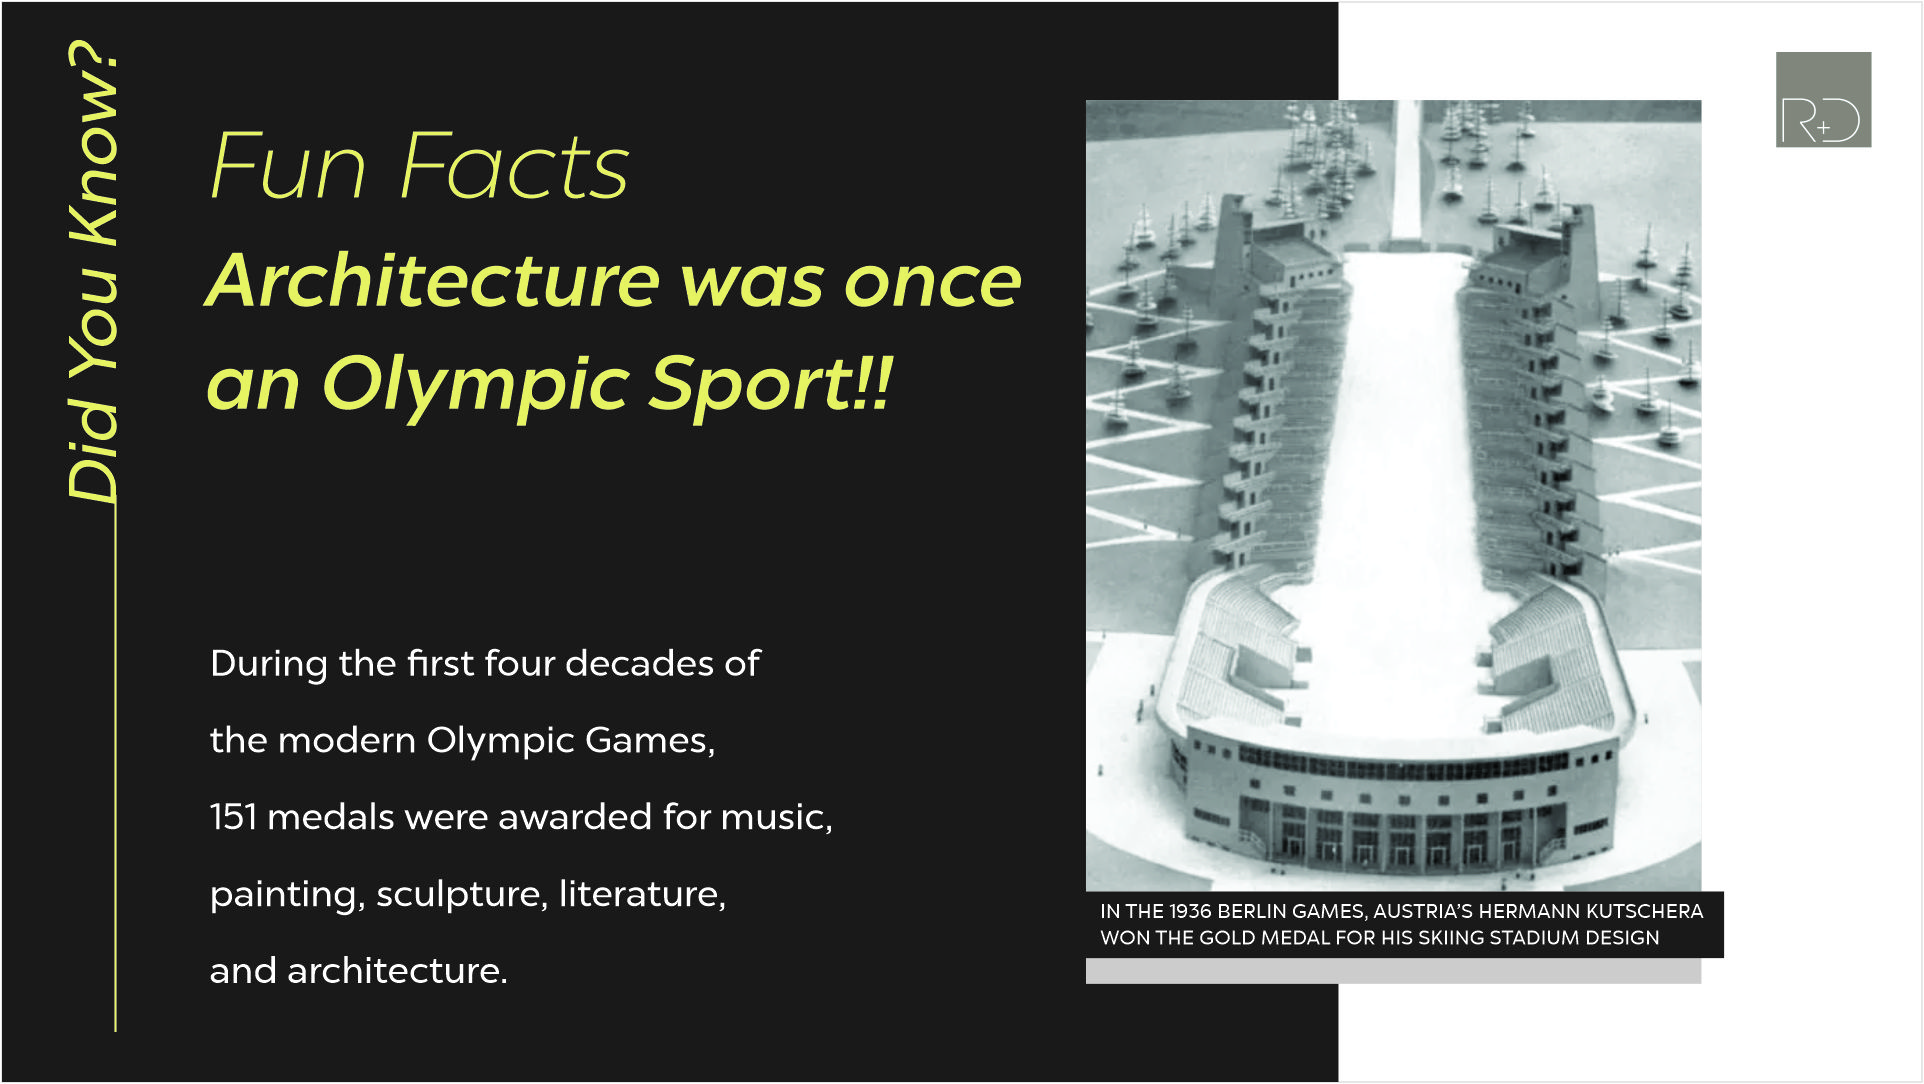 AEC Facts by Russell and Dawson- Architectue was once an Olympic Sports